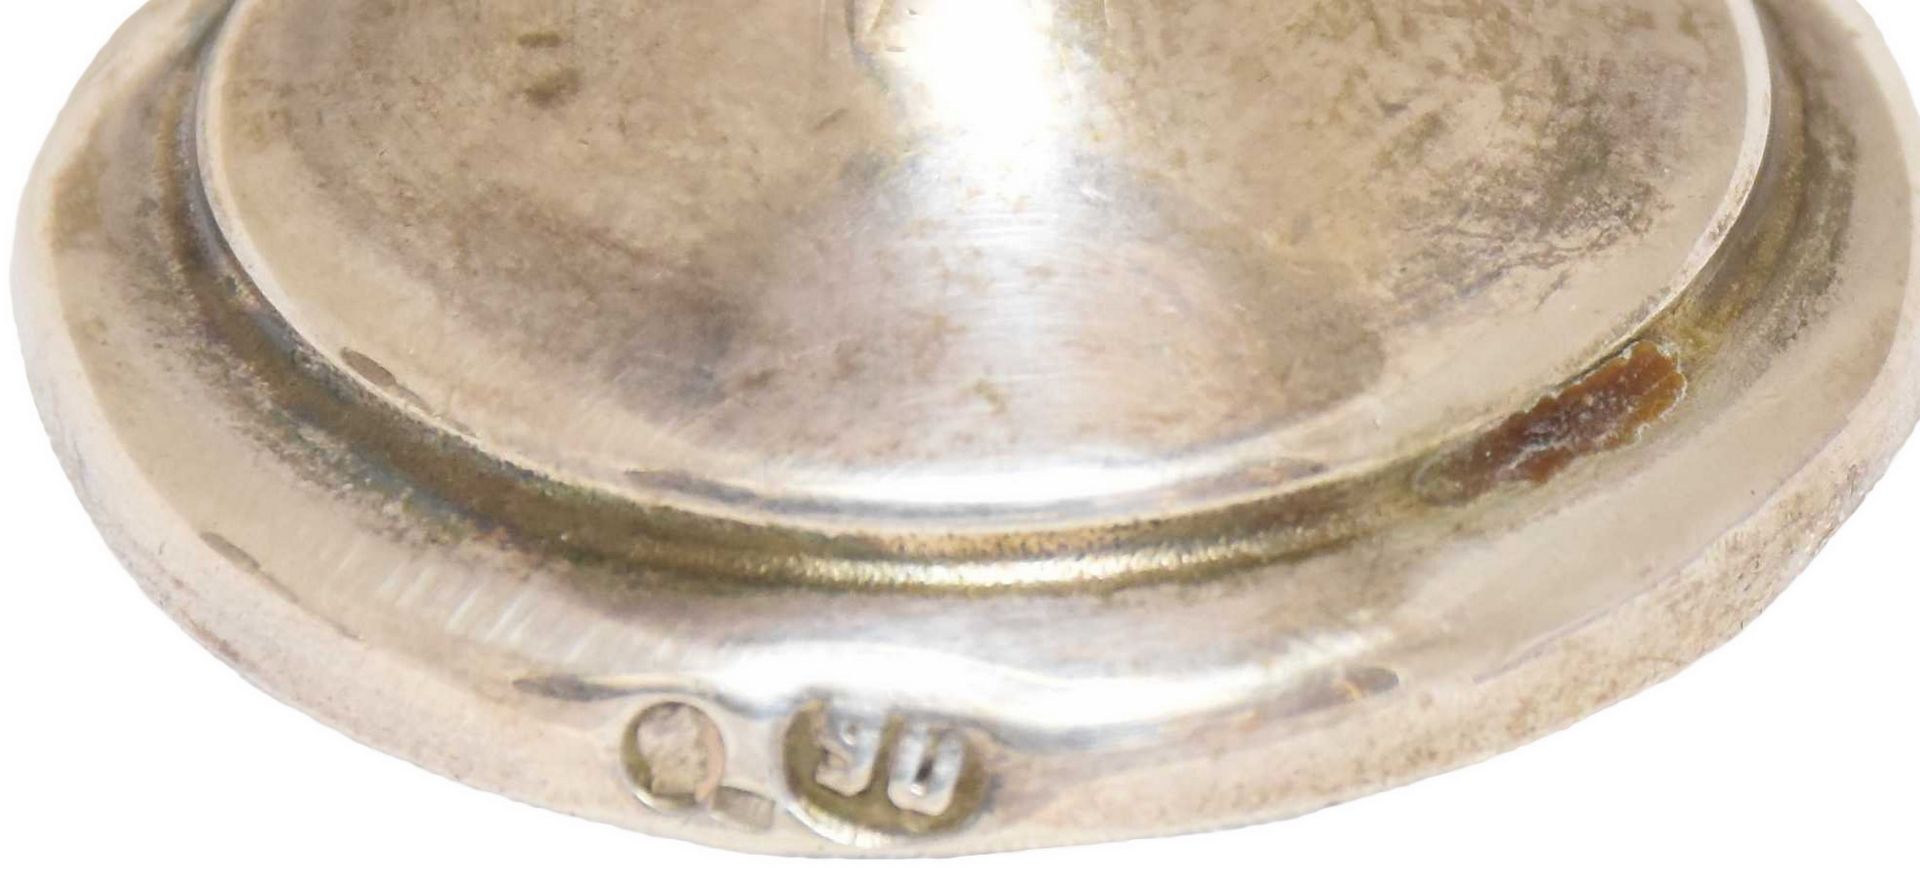 [Russian]. A pair of silver egg bowls, art-nouveau. - Russia, 20th cent. - 4,5x12 cm; 74 g. - Image 3 of 4